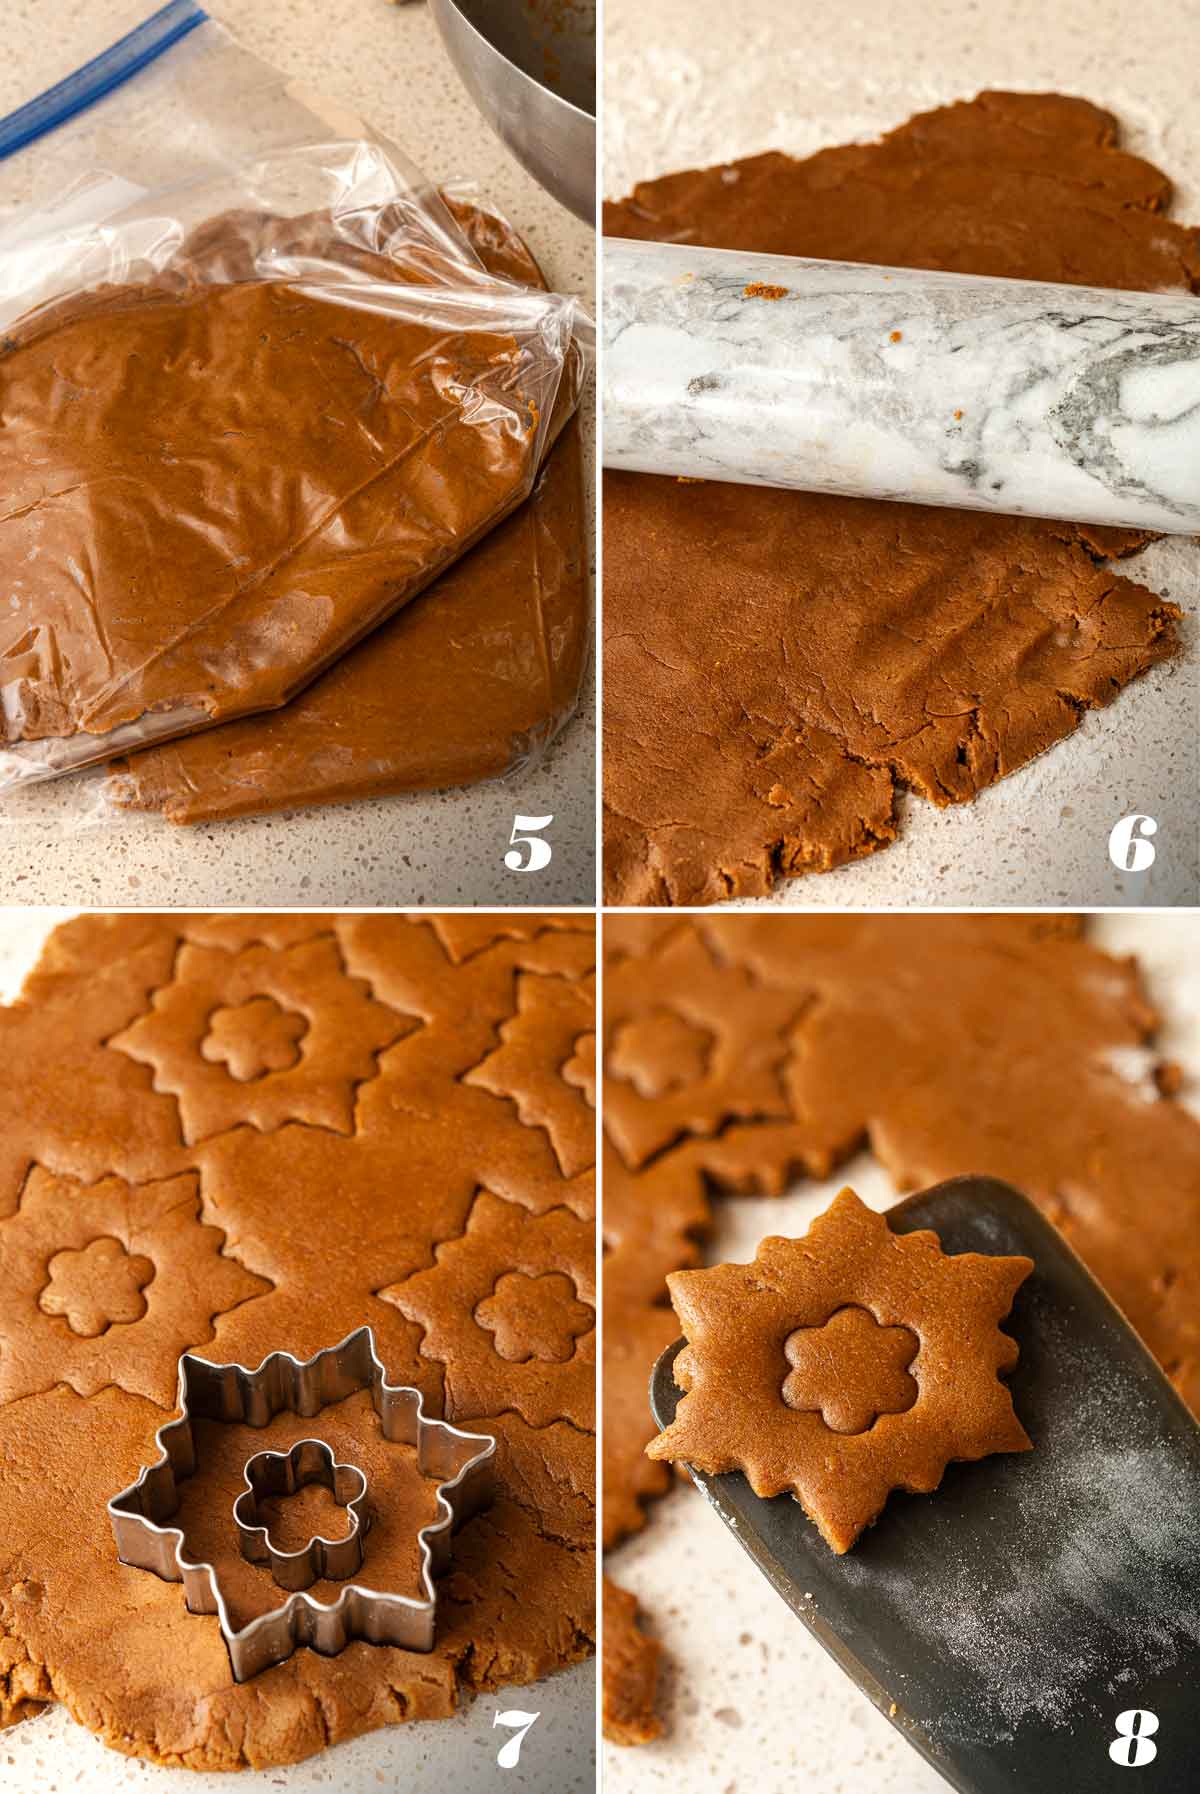 A collage of 4 numbered images showing how to roll and cut gingerbread cookies.